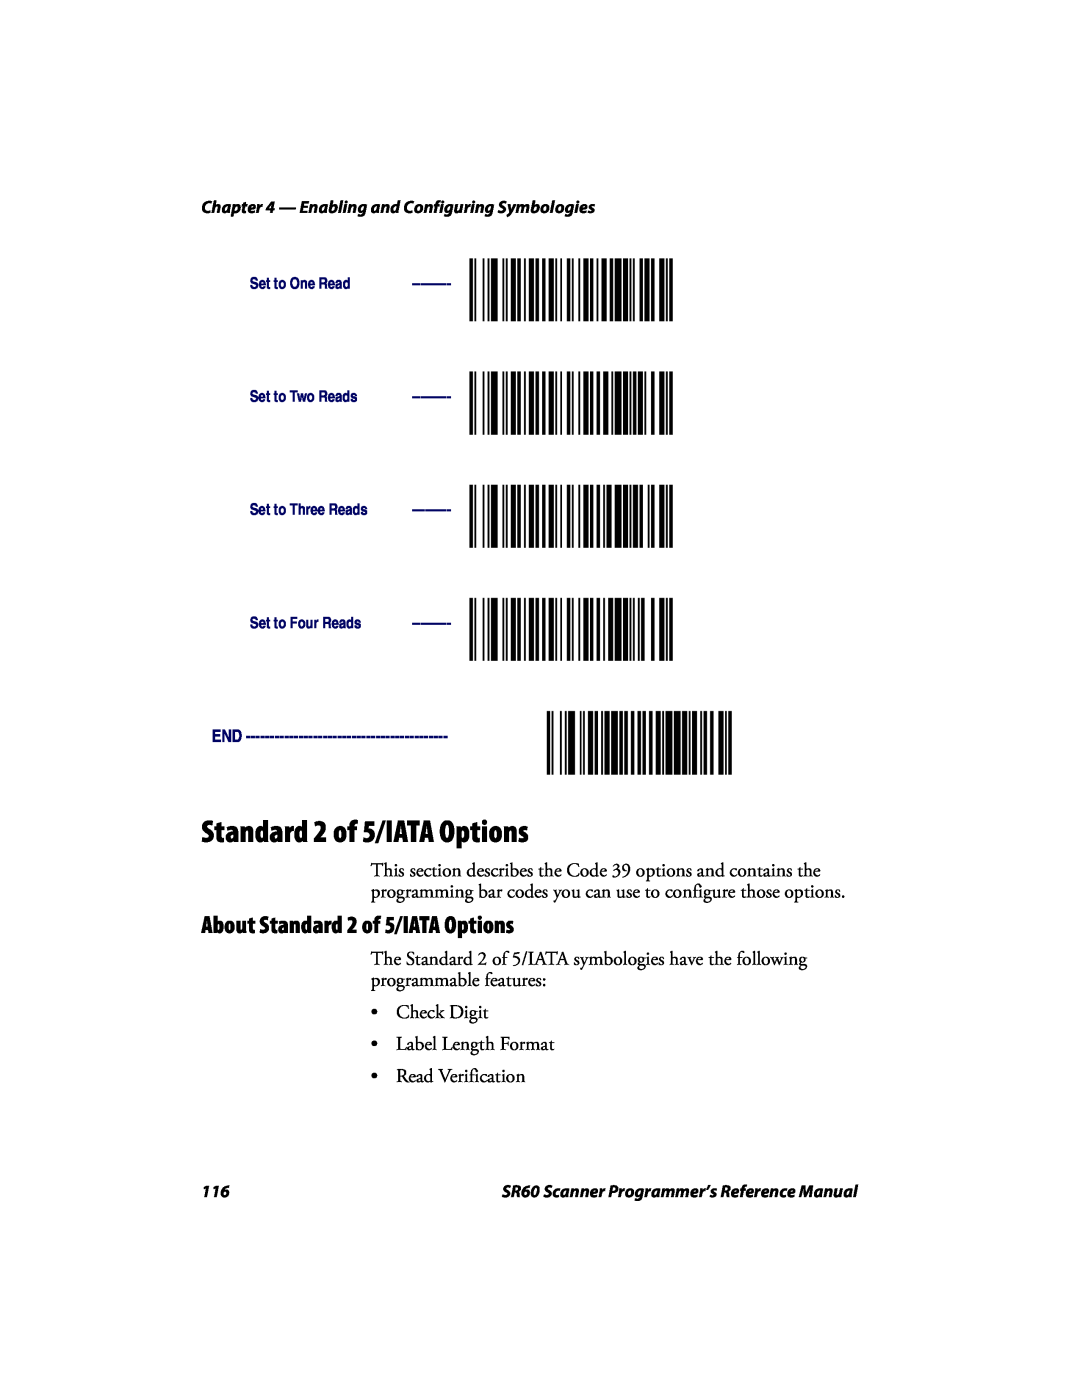 Intermec SR60 manual About Standard 2 of 5/IATA Options, Enabling and Configuring Symbologies 